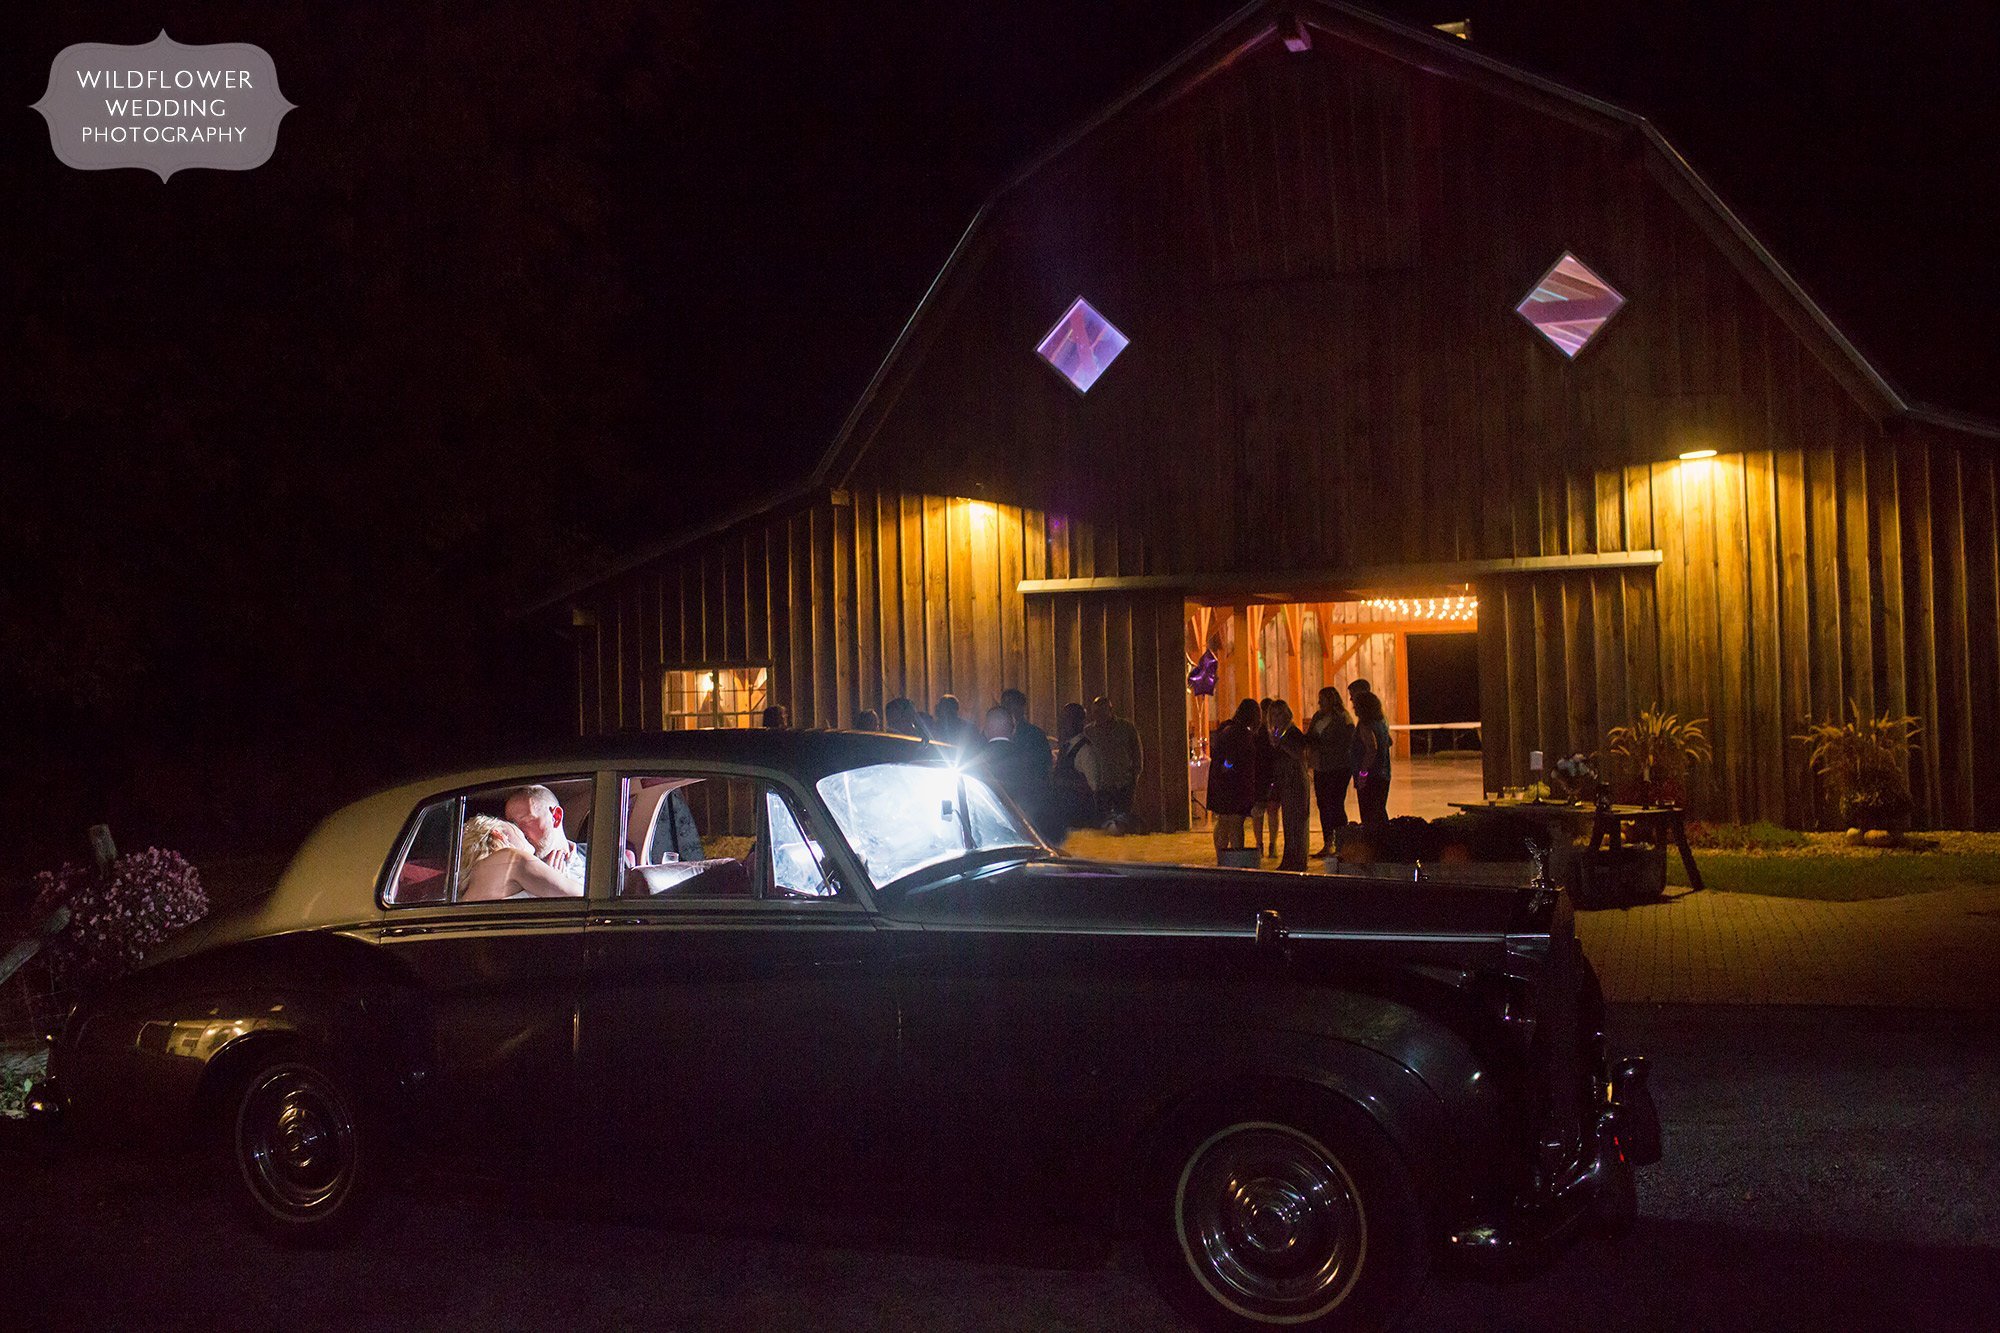 The bride and groom kiss in the back of their Rolls Royce at night for KS barn wedding.